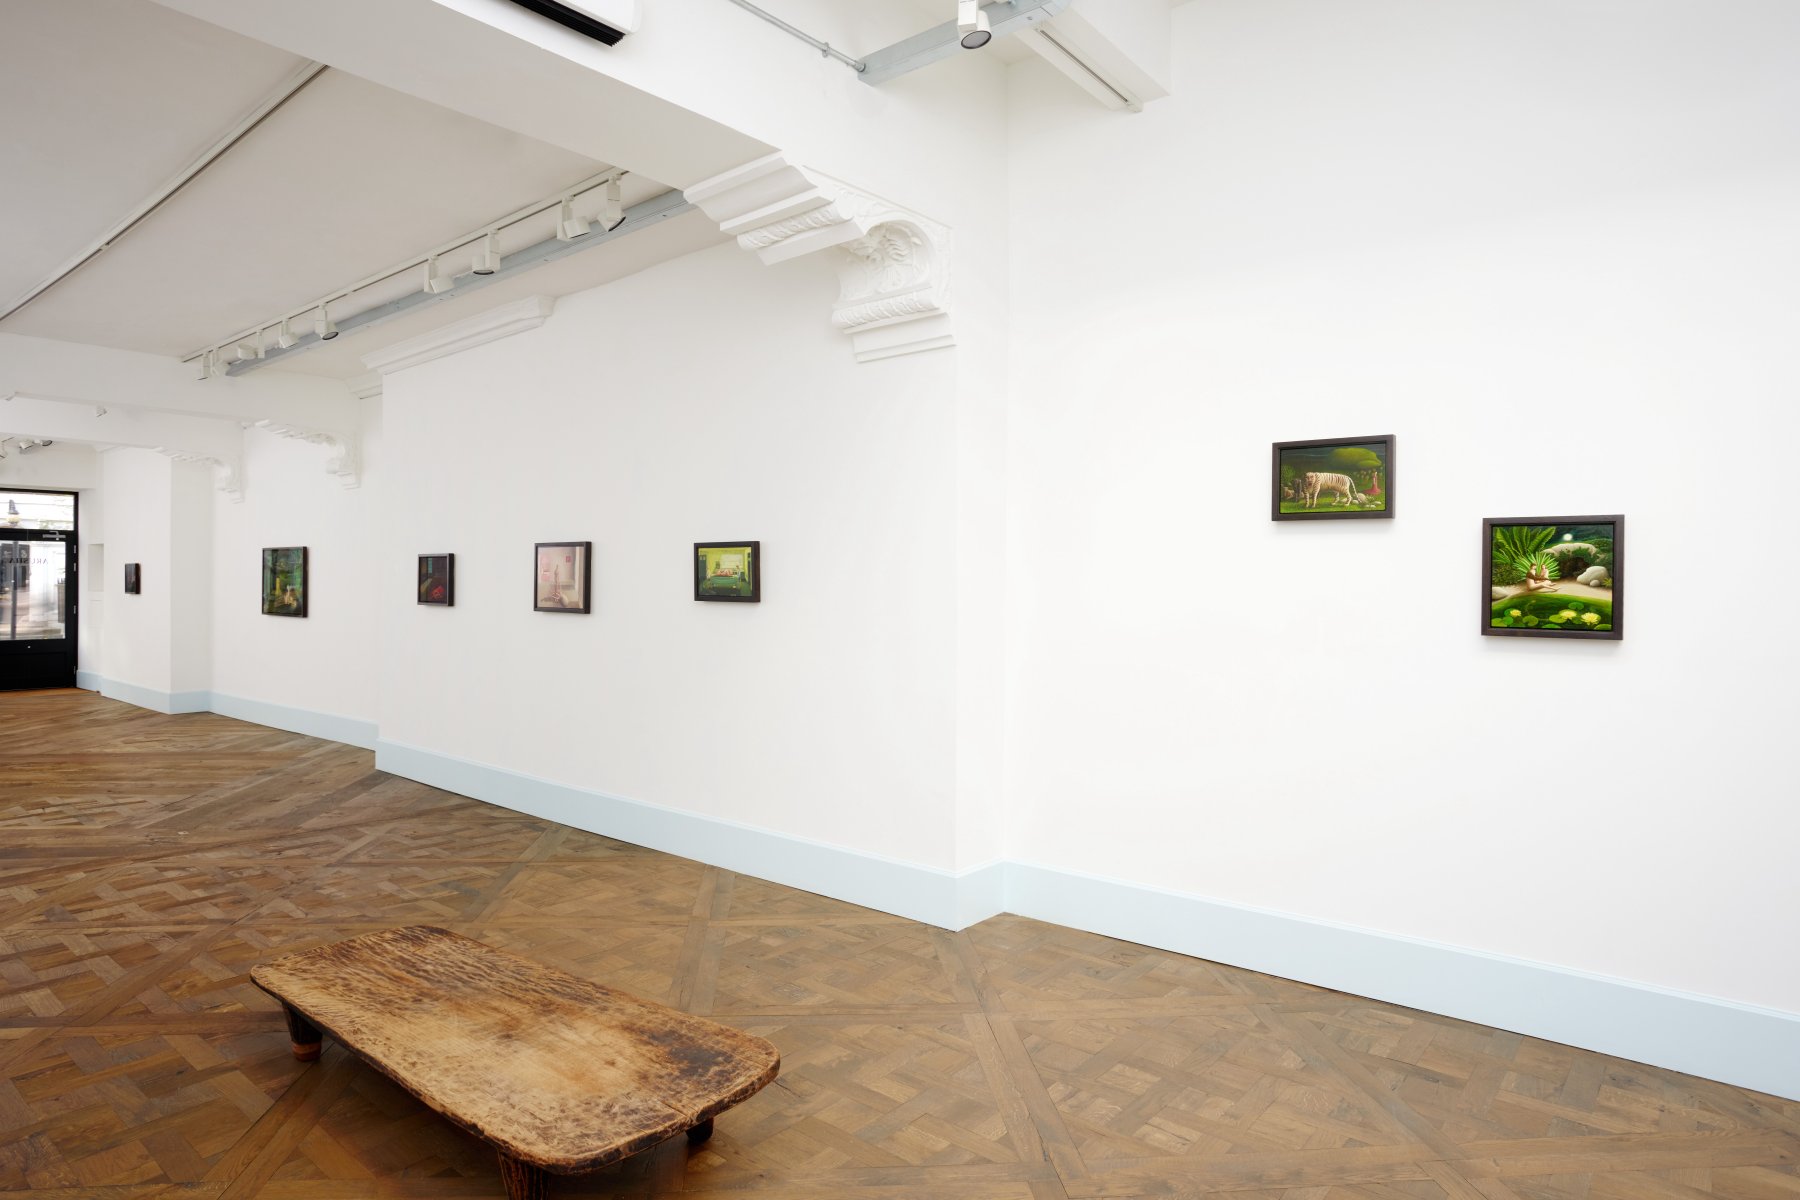 Installation image for Helen Flockhart - In Elysian Fields, at Arusha Gallery